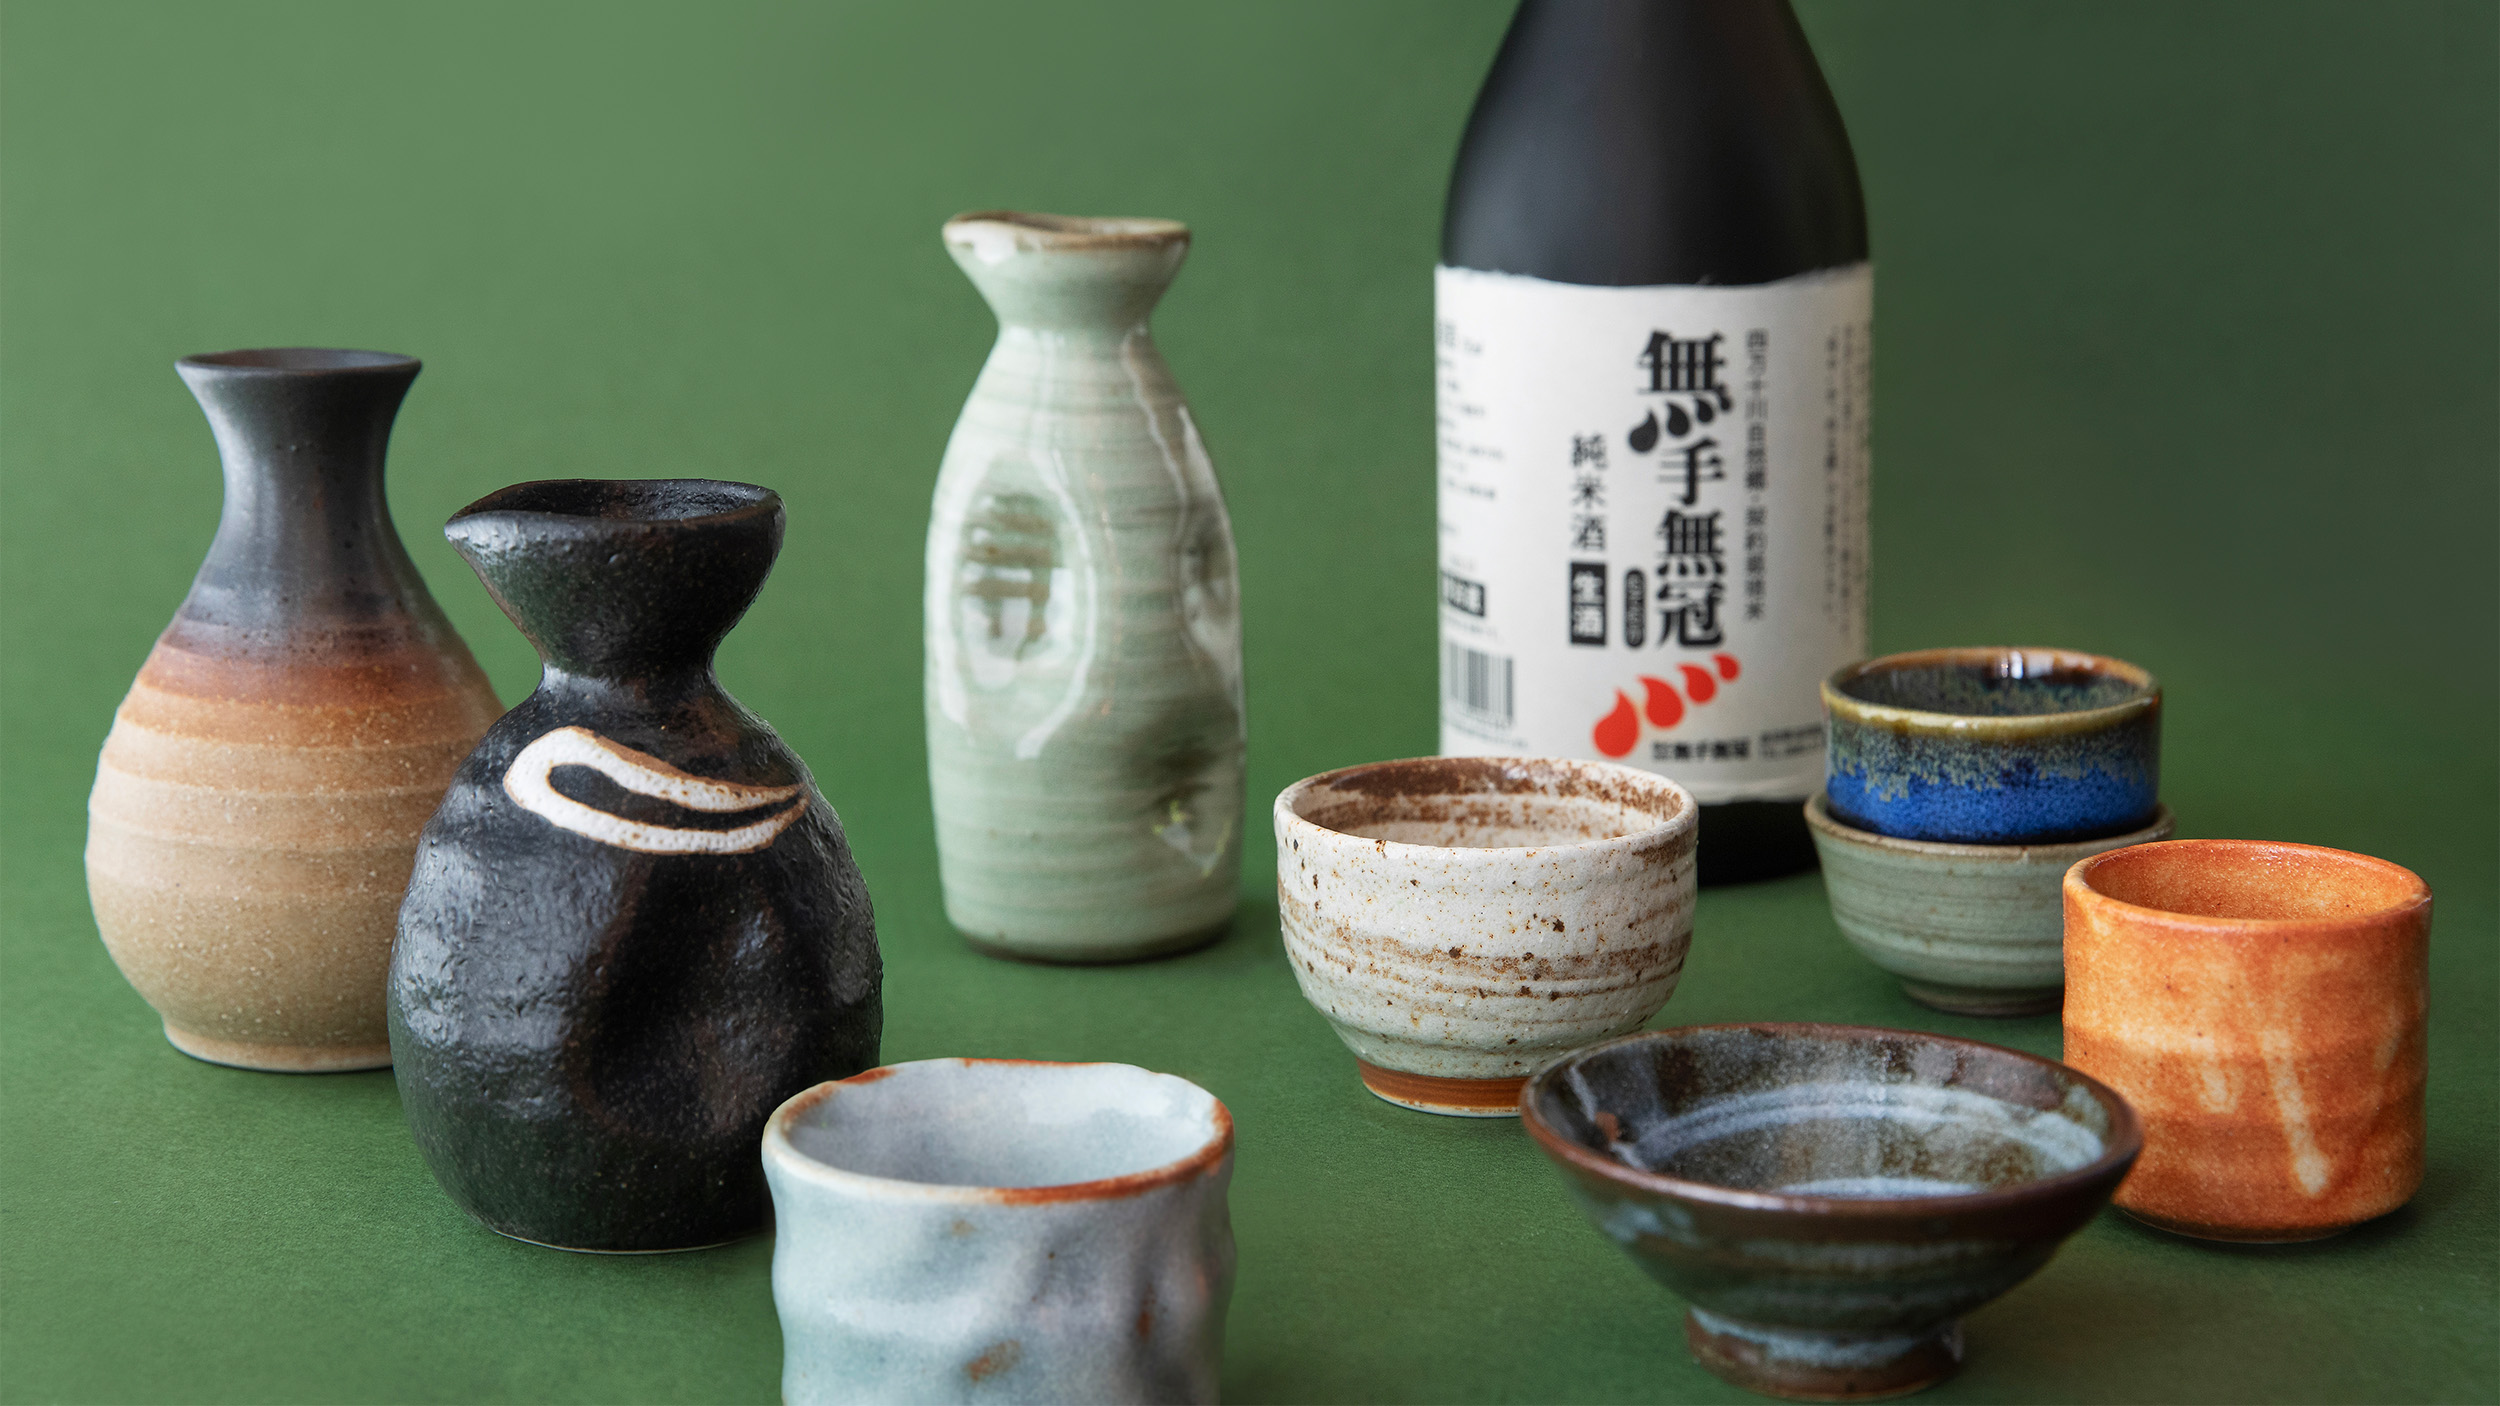 Japanese sake served in Tokkuri. You can choose favourite cup to drink